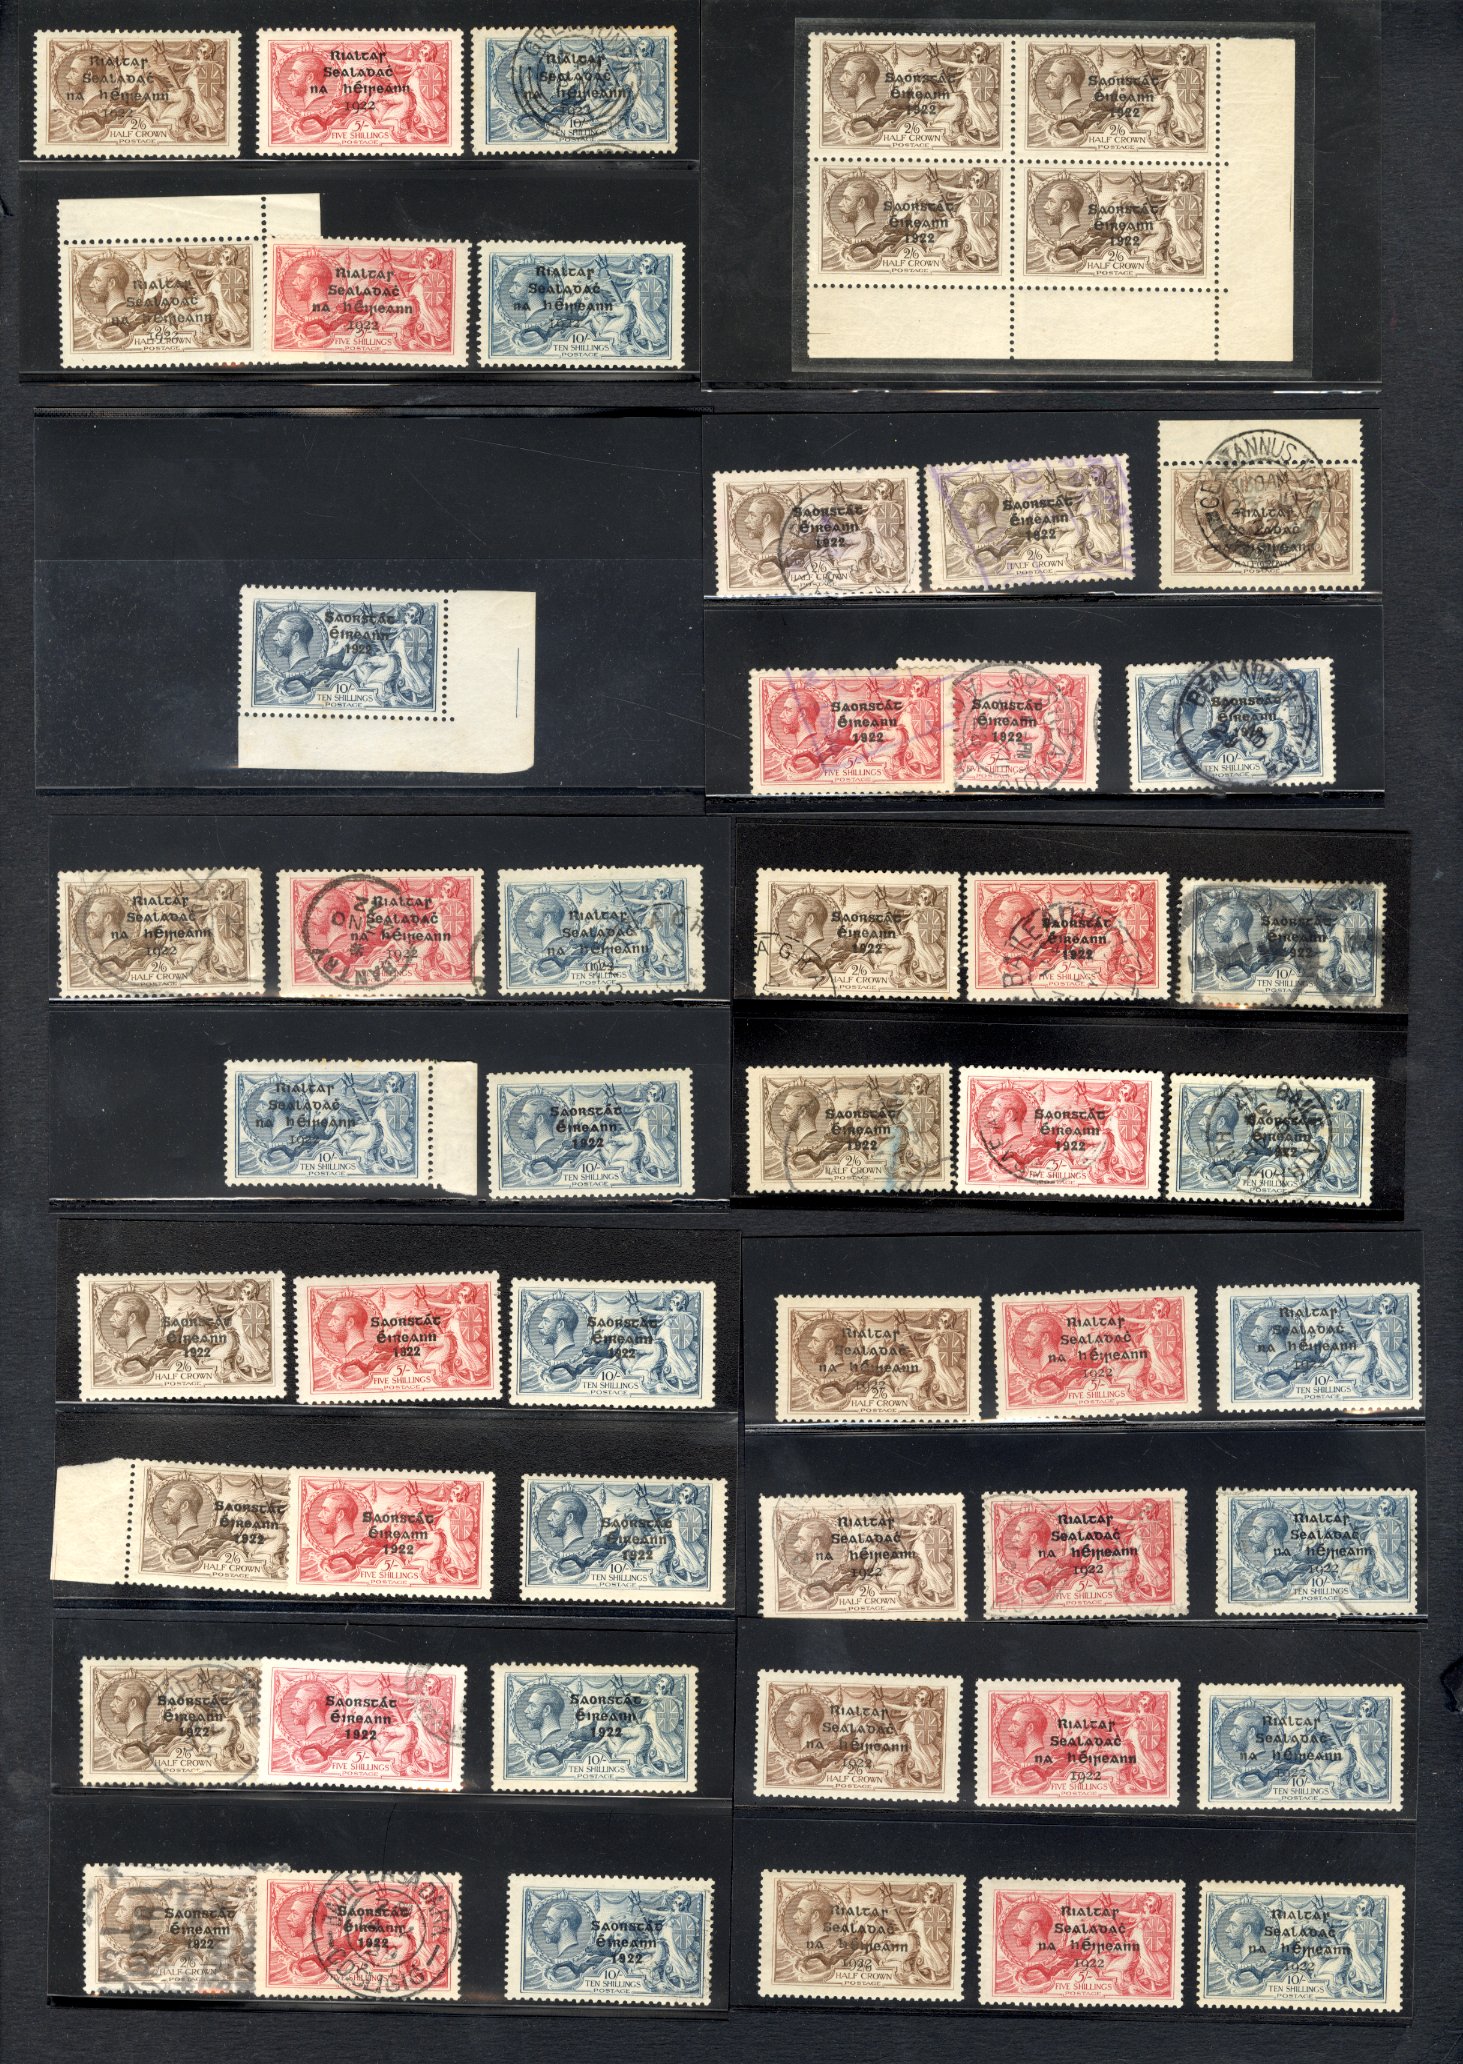 Lot 1488 - LARGE LOTS AND COLLECTIONS RUSSIA - Covers and Postal History  -  Cherrystone Auctions U.S. & Worldwide Stamps & Postal History